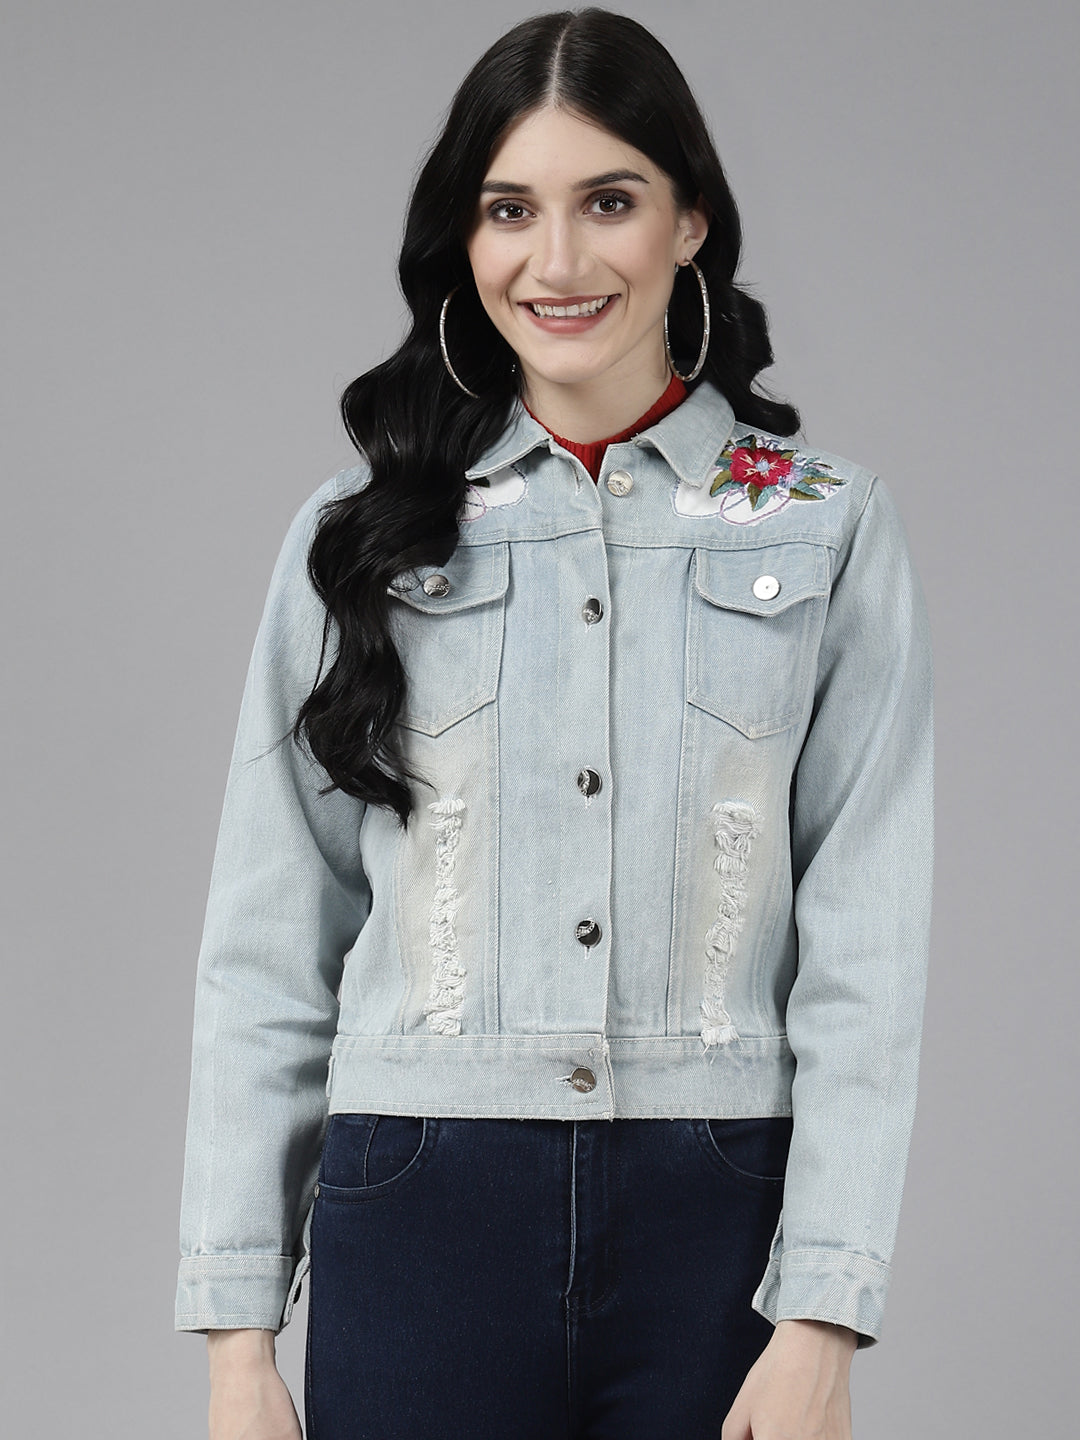 Bhama COUTURE 3/4th Sleeve Solid Women Denim Jacket - Buy Bhama COUTURE  3/4th Sleeve Solid Women Denim Jacket Online at Best Prices in India |  Flipkart.com